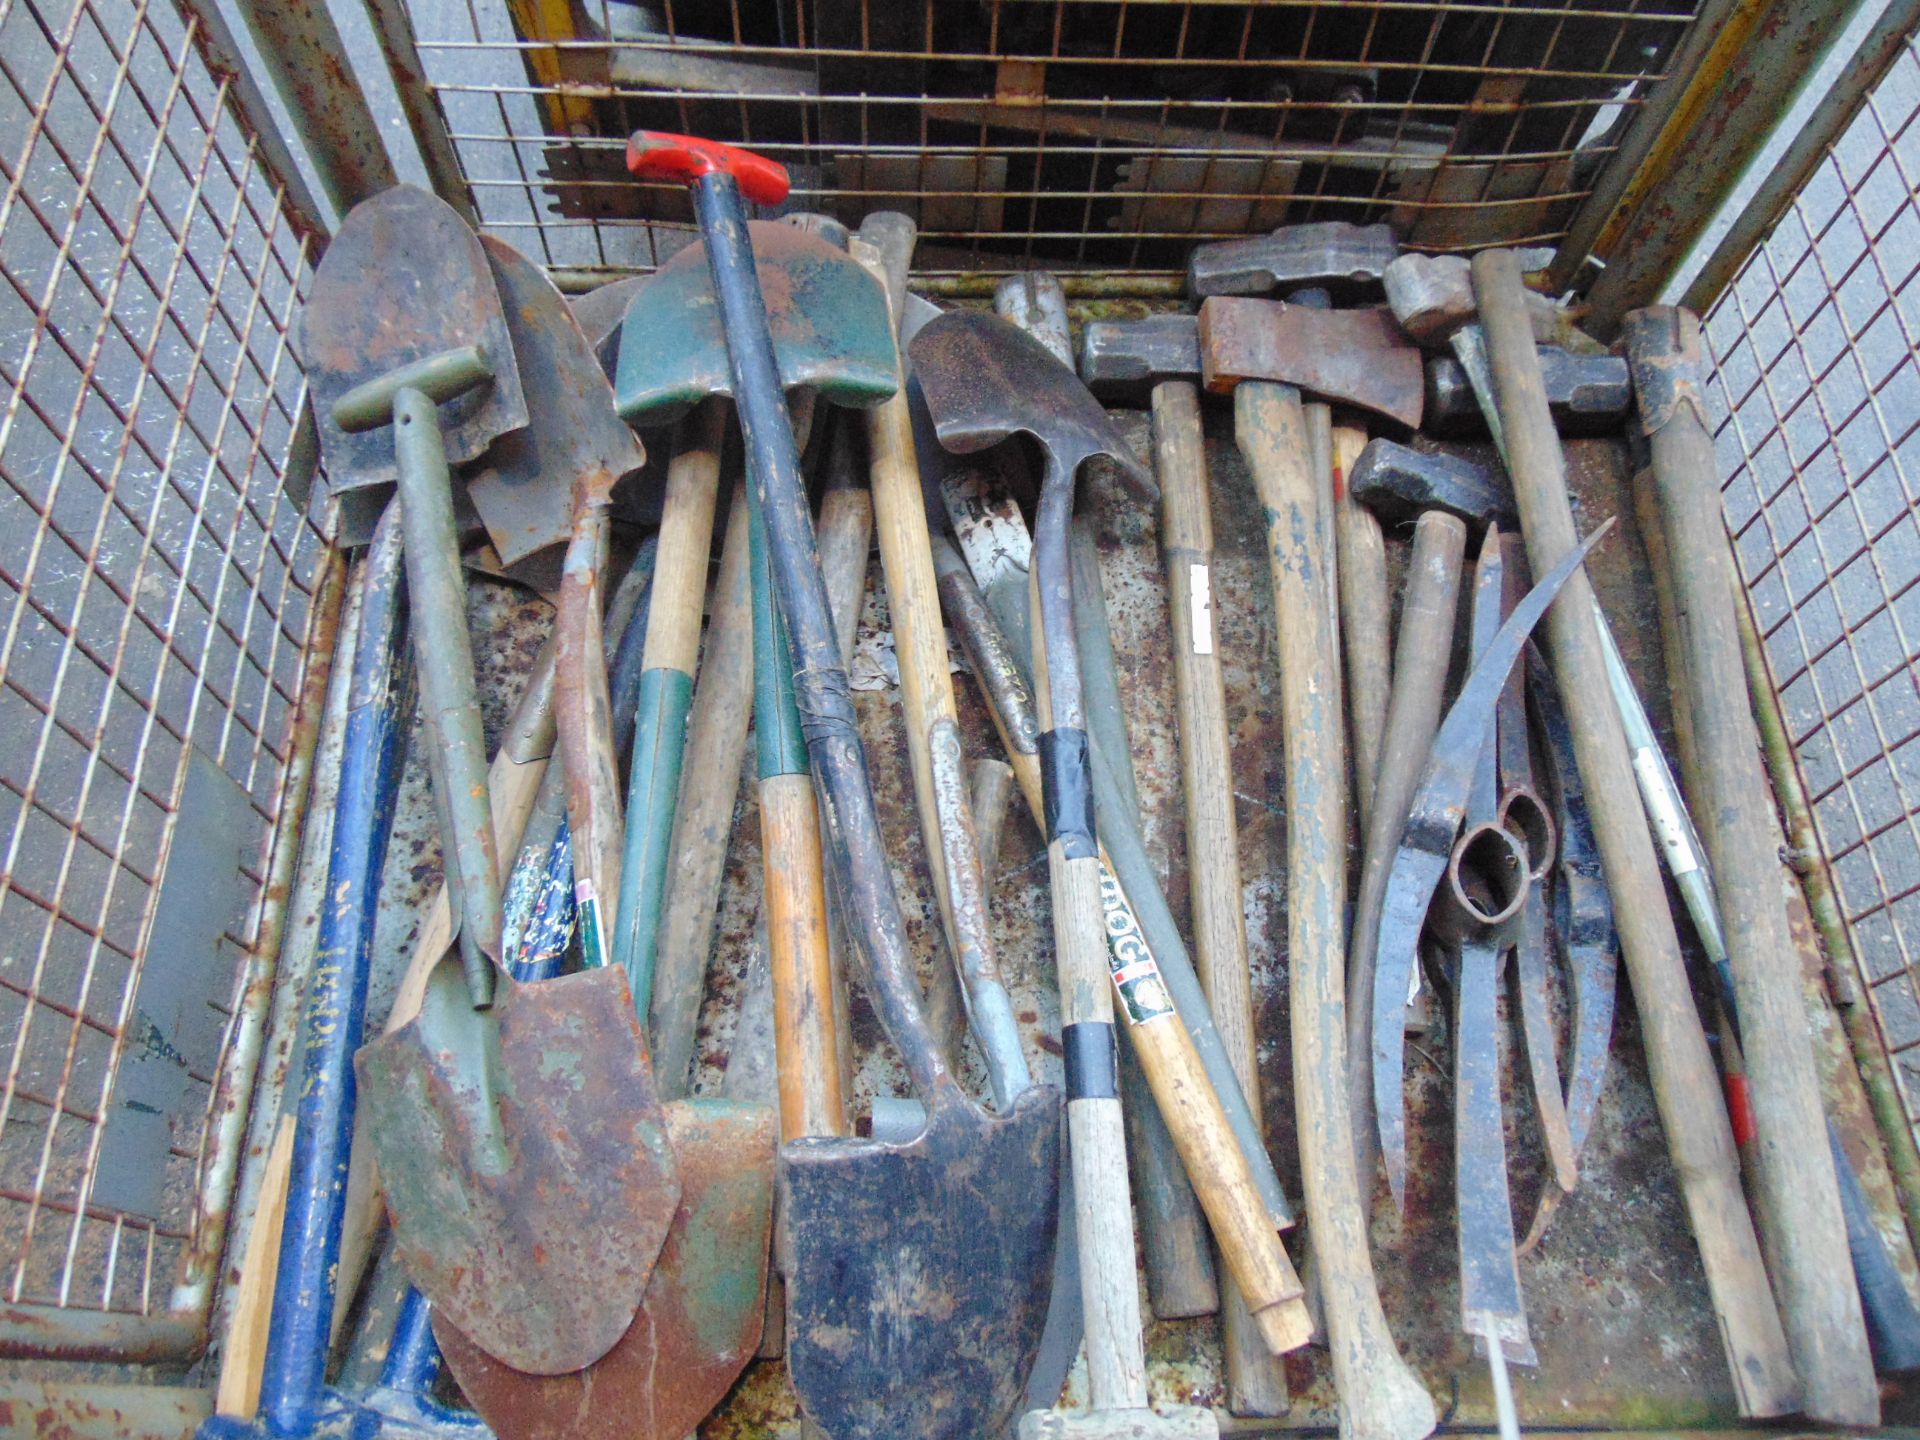 1 x Stillage 30+ British Army Pioneer Picks, Shovels, Axes and Sledge Hammers